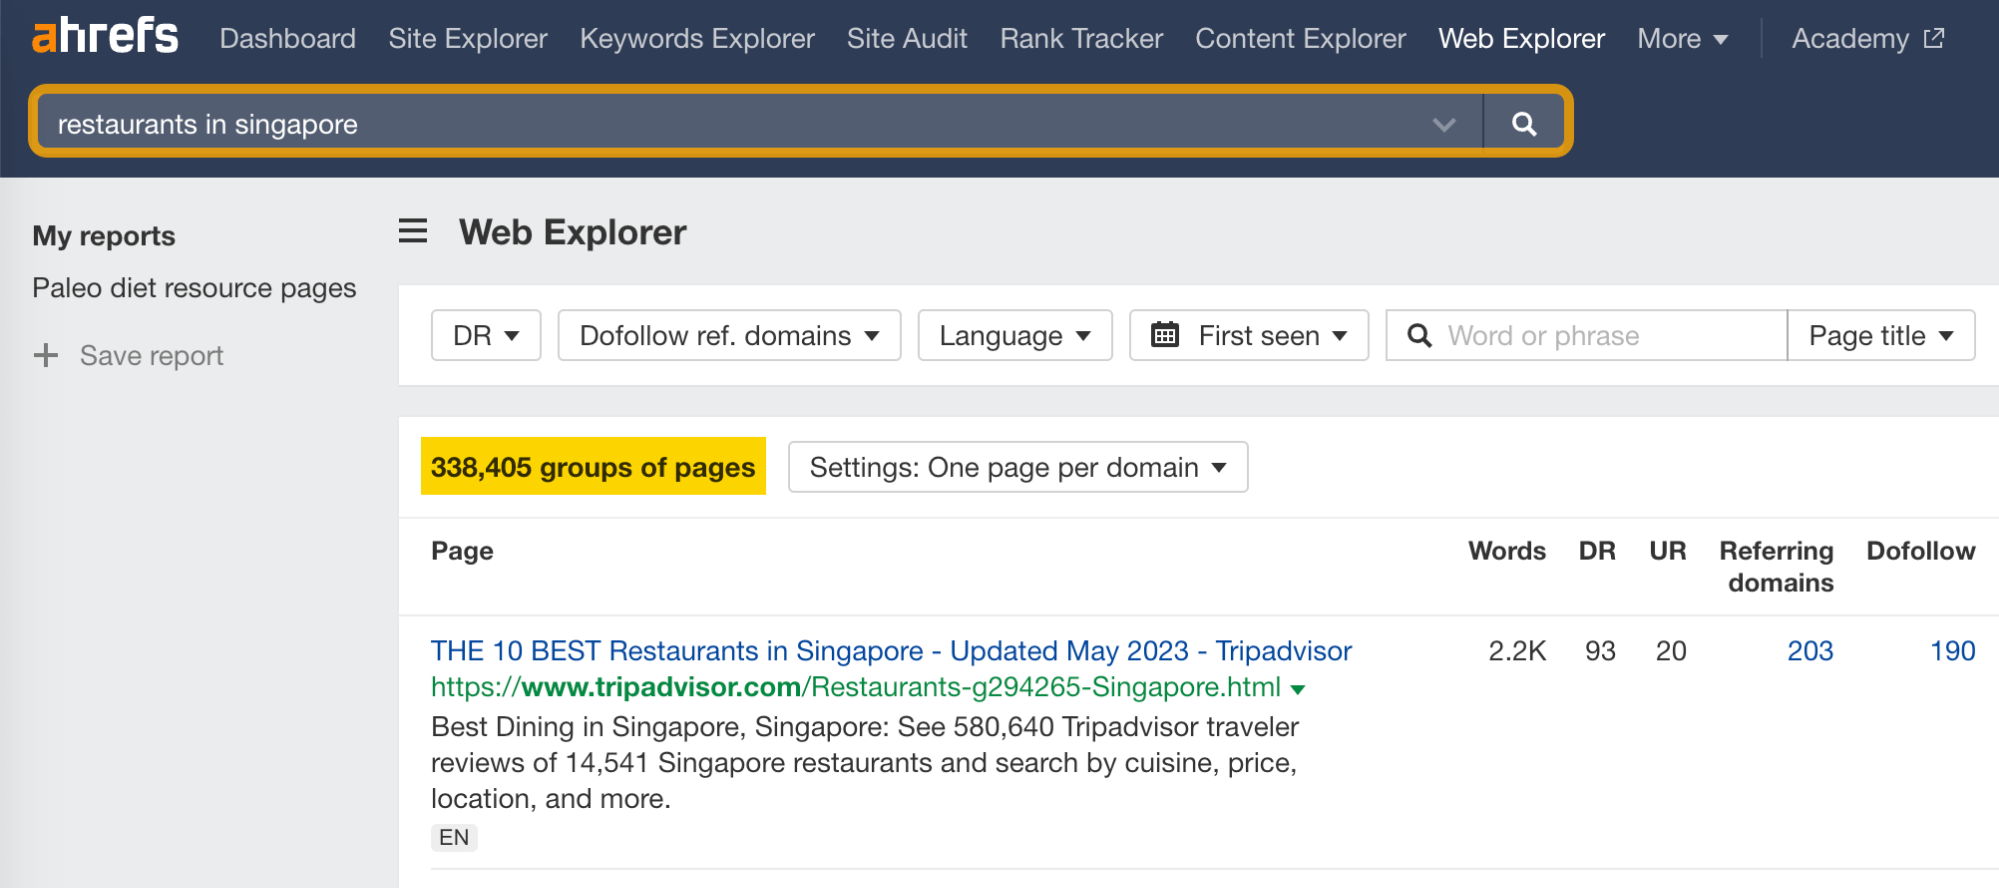 Search results for "restaurants in singapore," via Ahrefs' Web Explorer